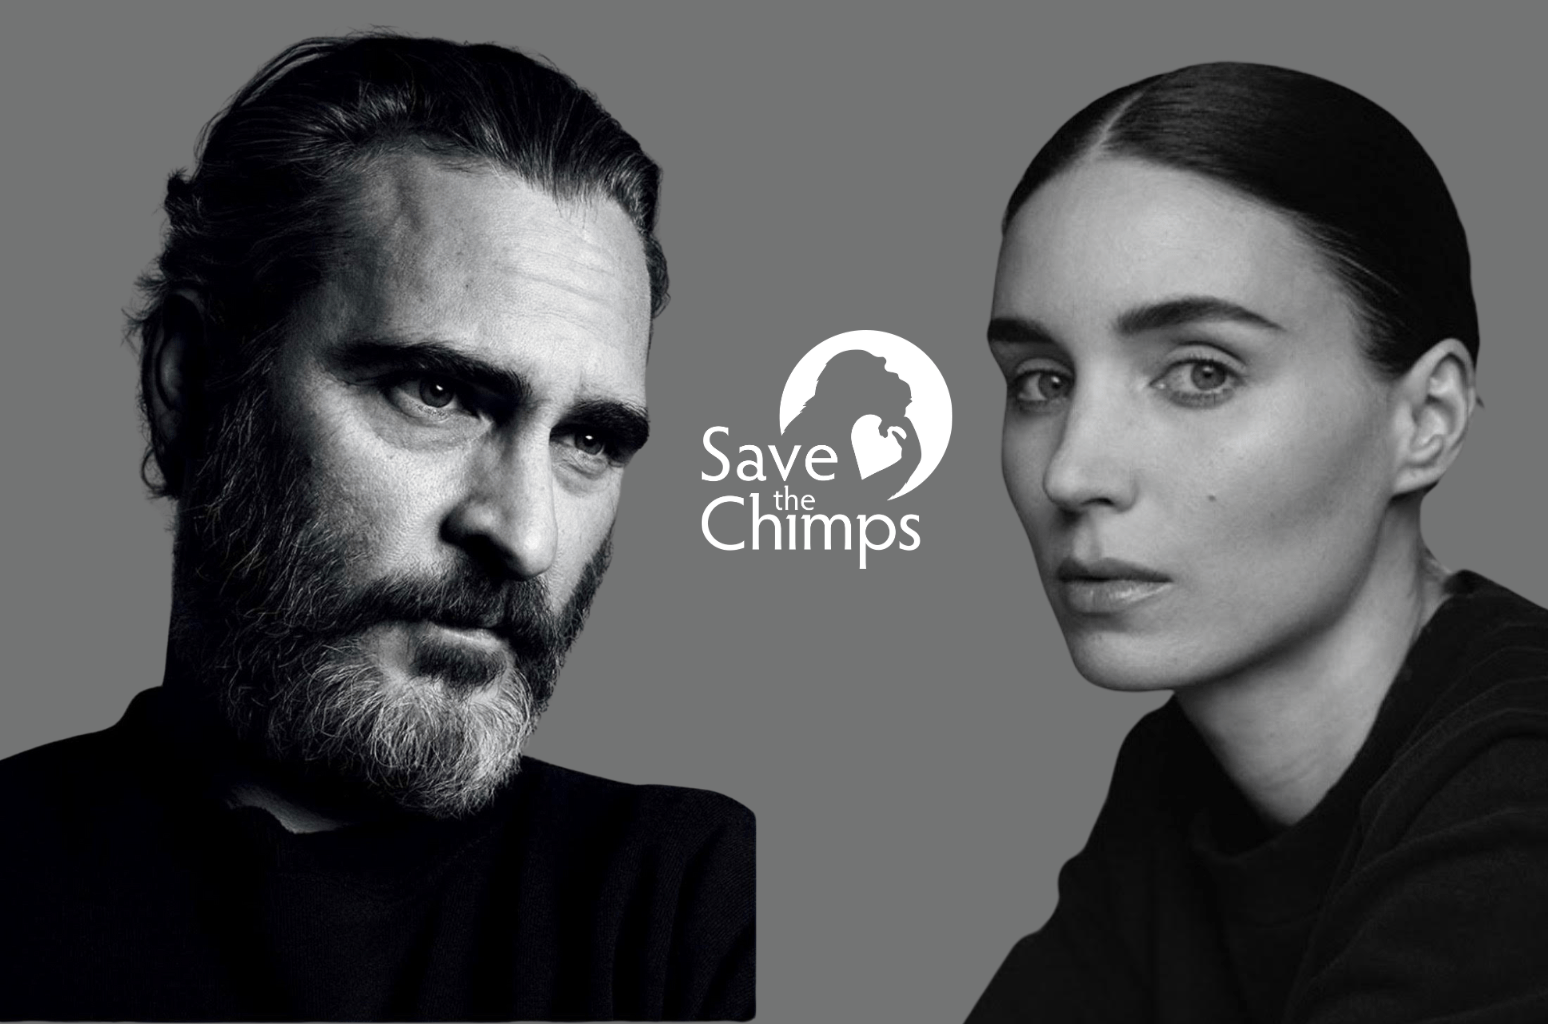 The Joaquin Phoenix & Rooney Mara Save the Chimps Collection